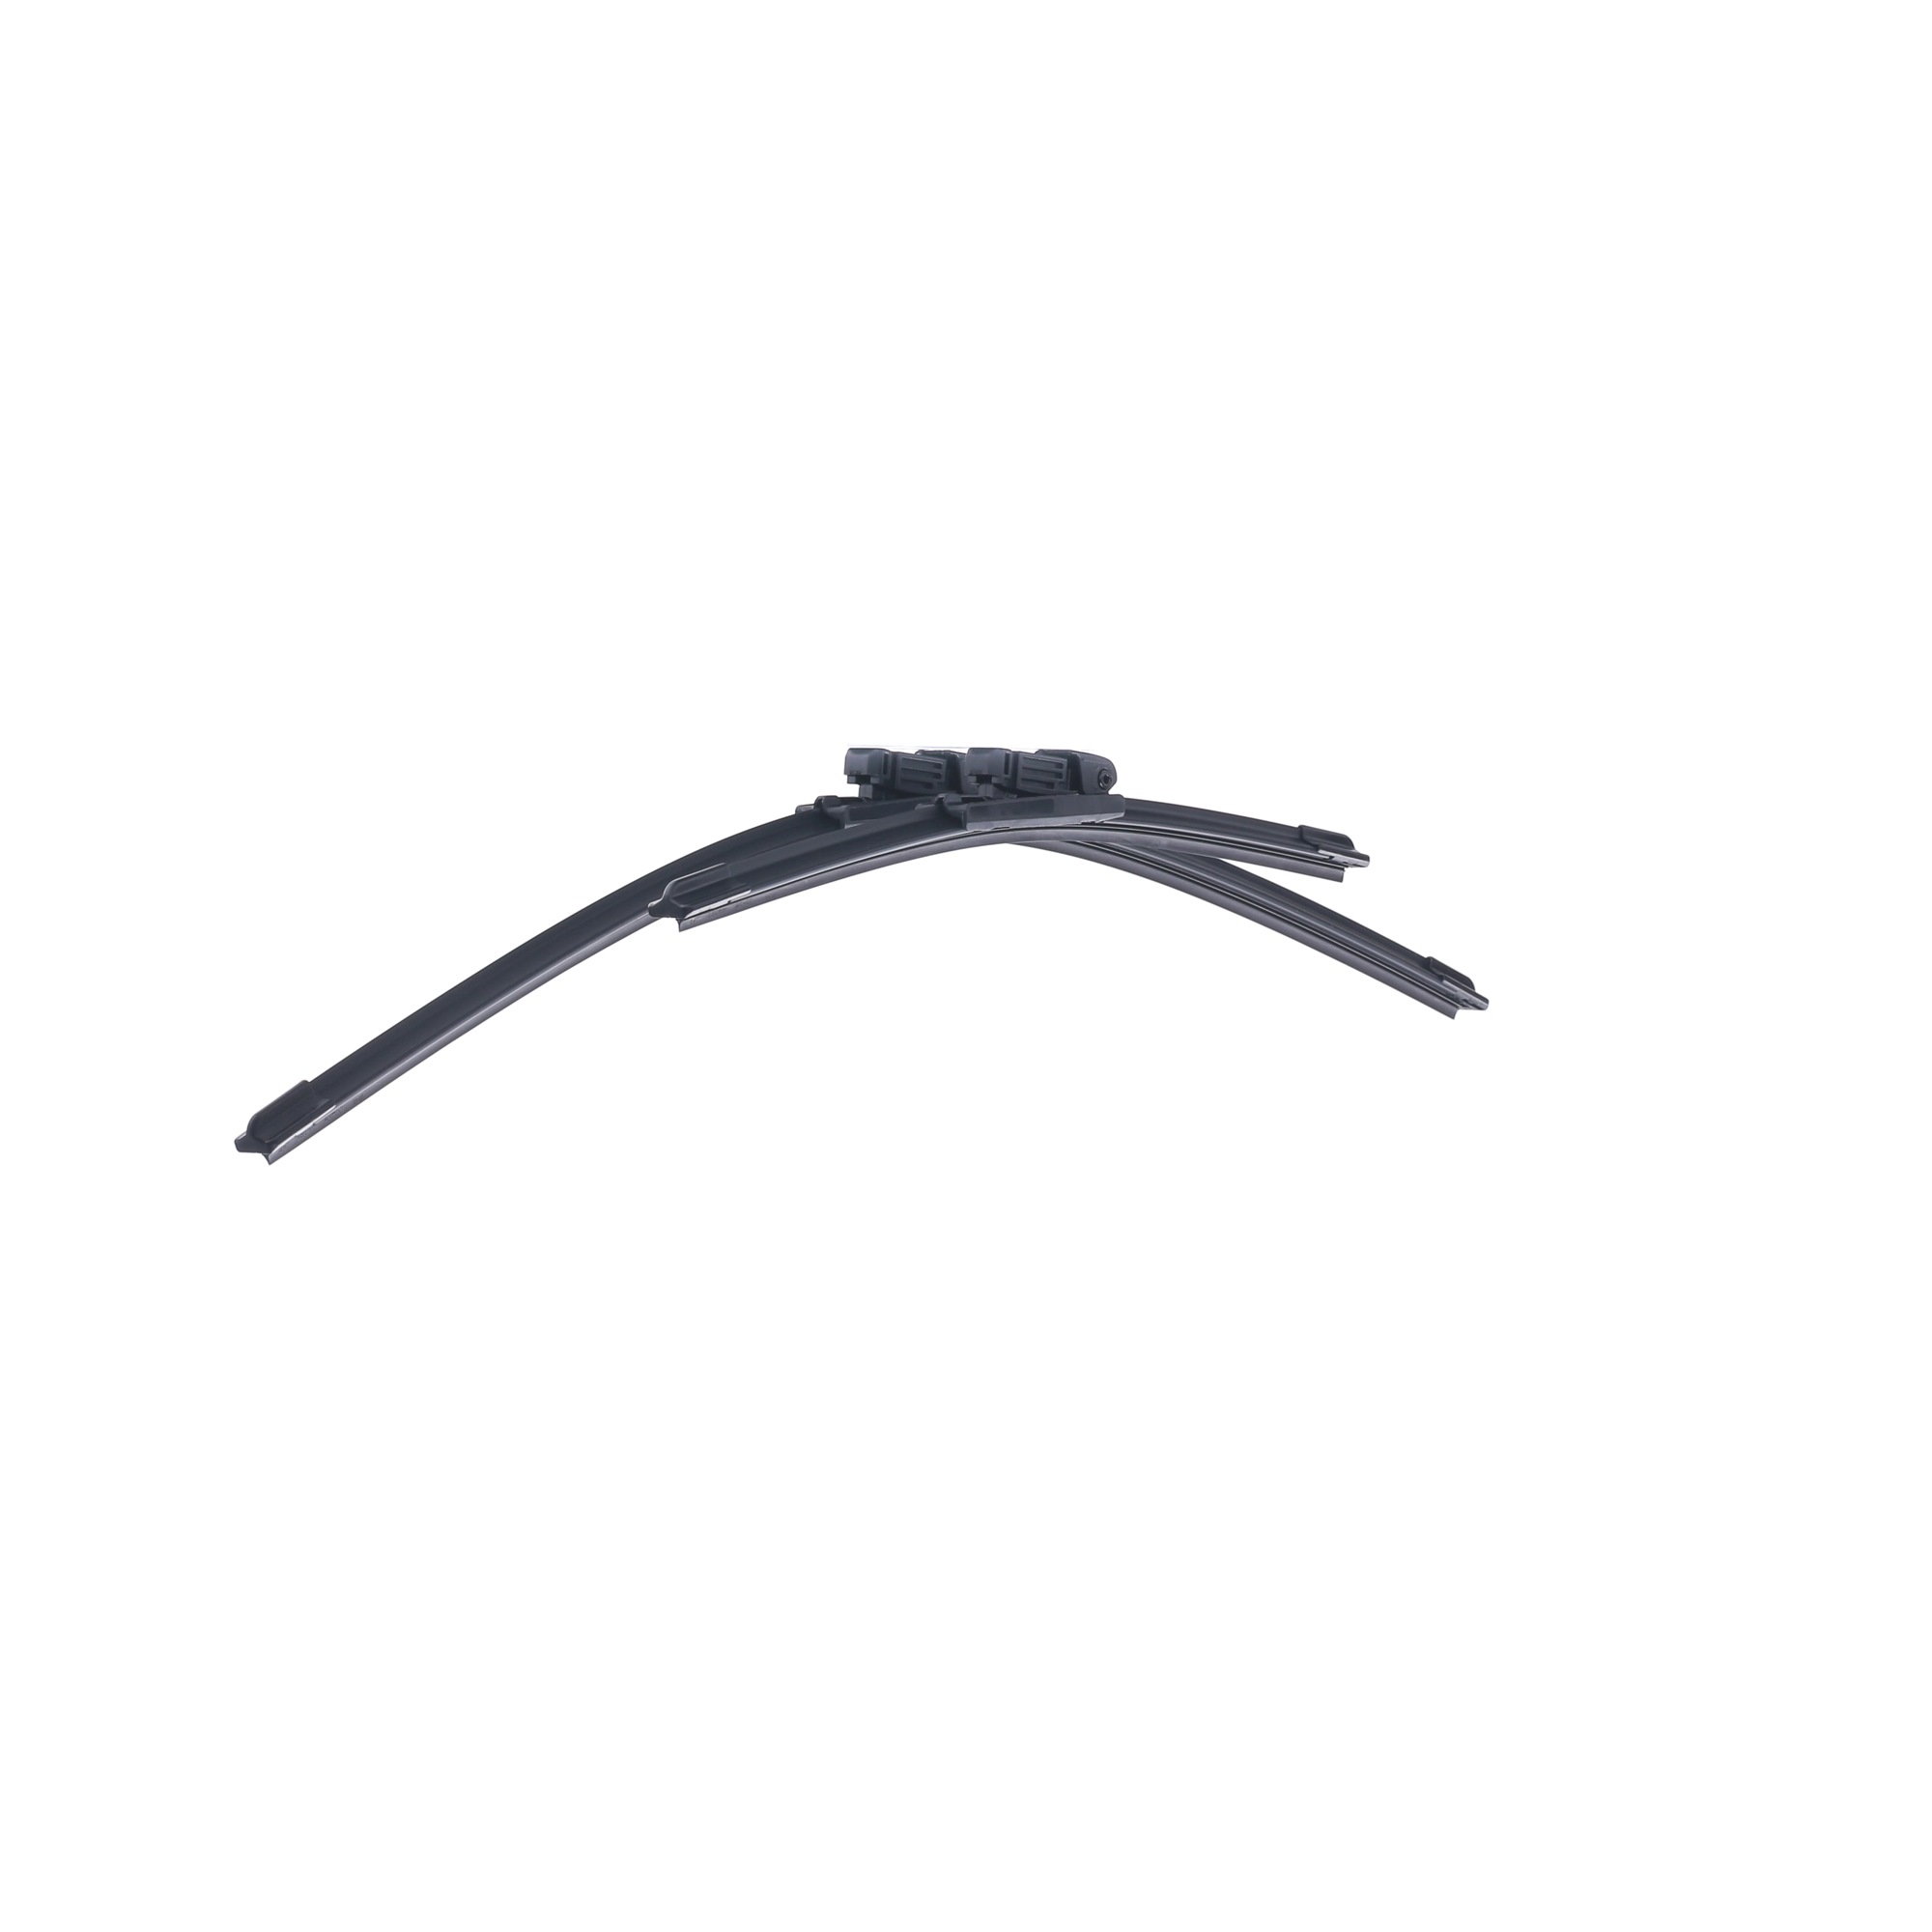 STARK SKWIB-0940299 Wiper blade 650, 350 mm Front, Beam, for left-hand drive vehicles